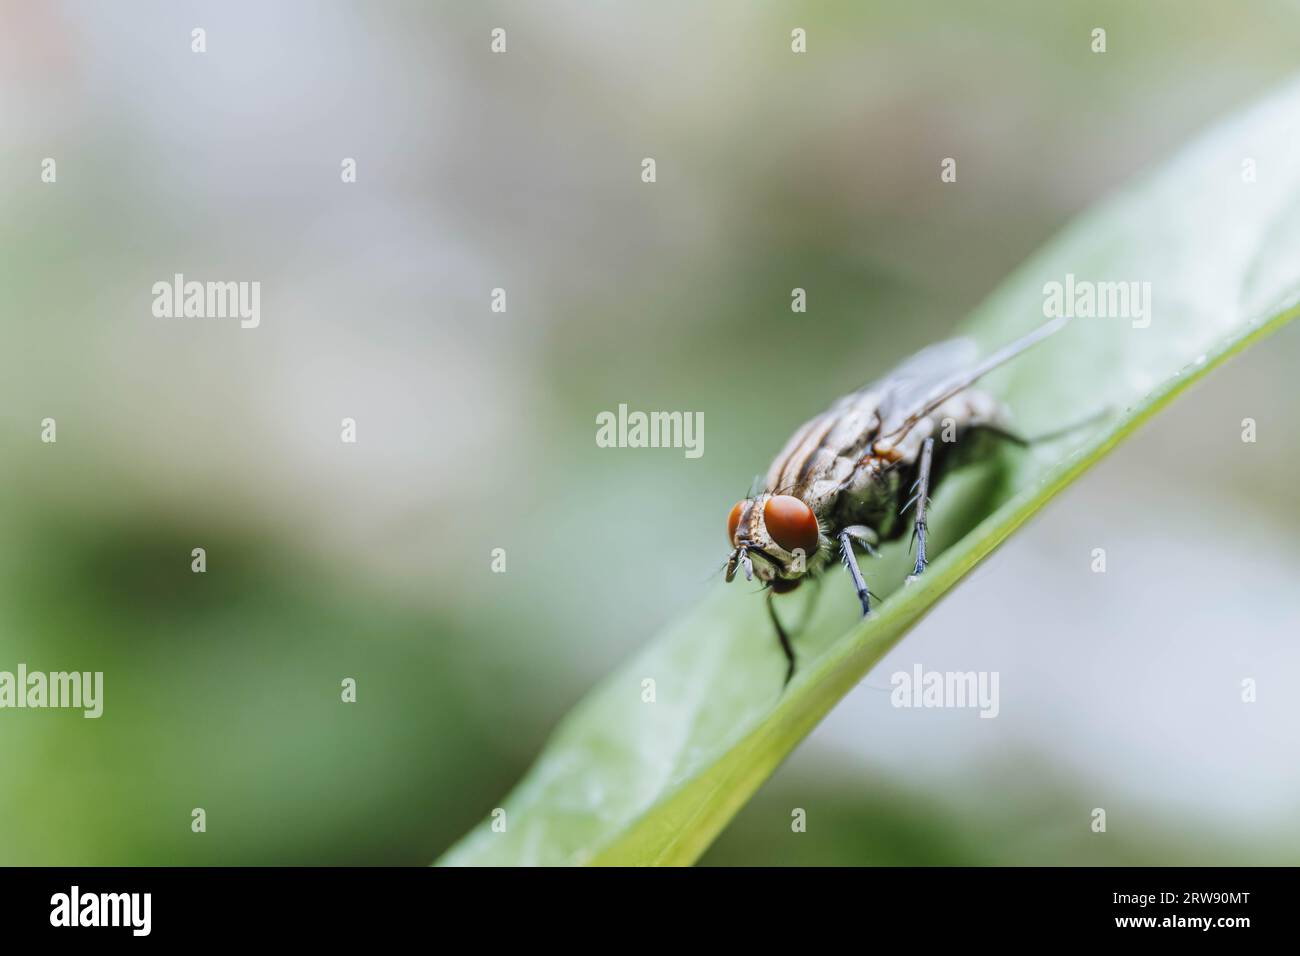 Macro shot of a housefly perched on a leaf with a bokeh background Stock Photo